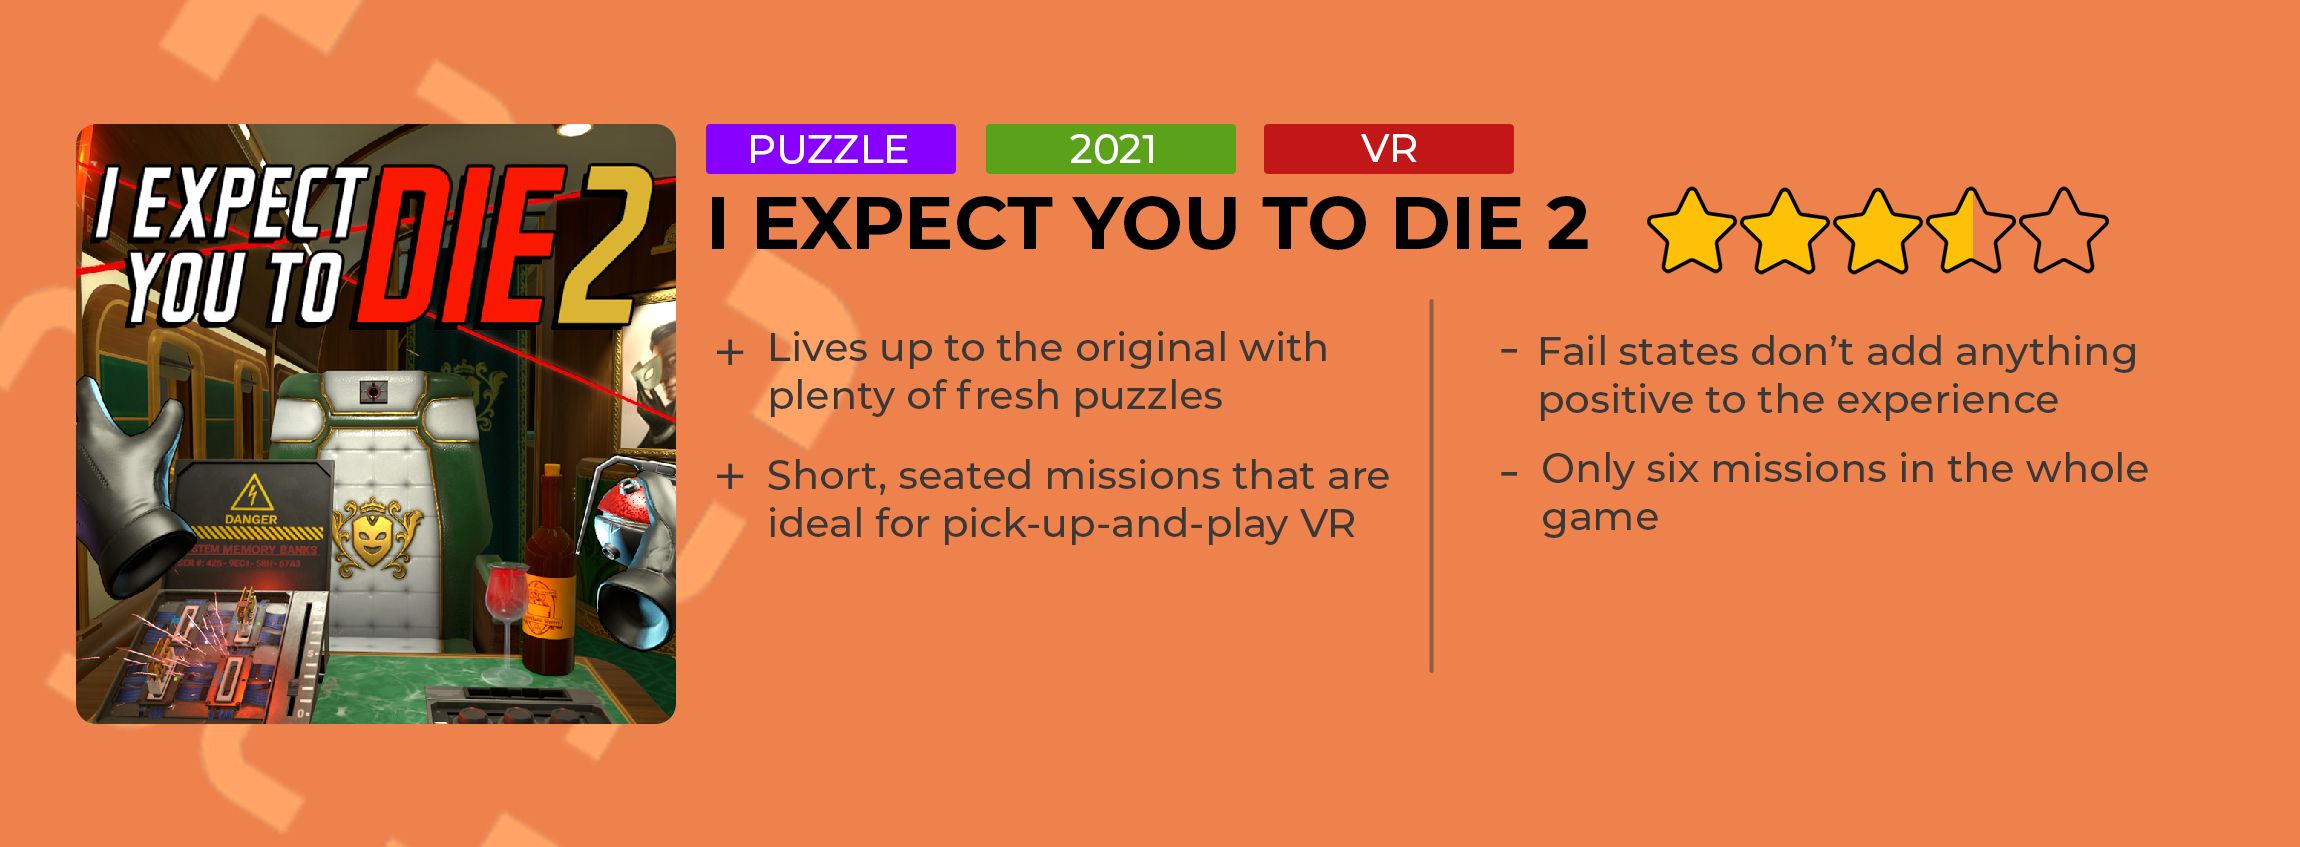 I expect you to die 2 review card